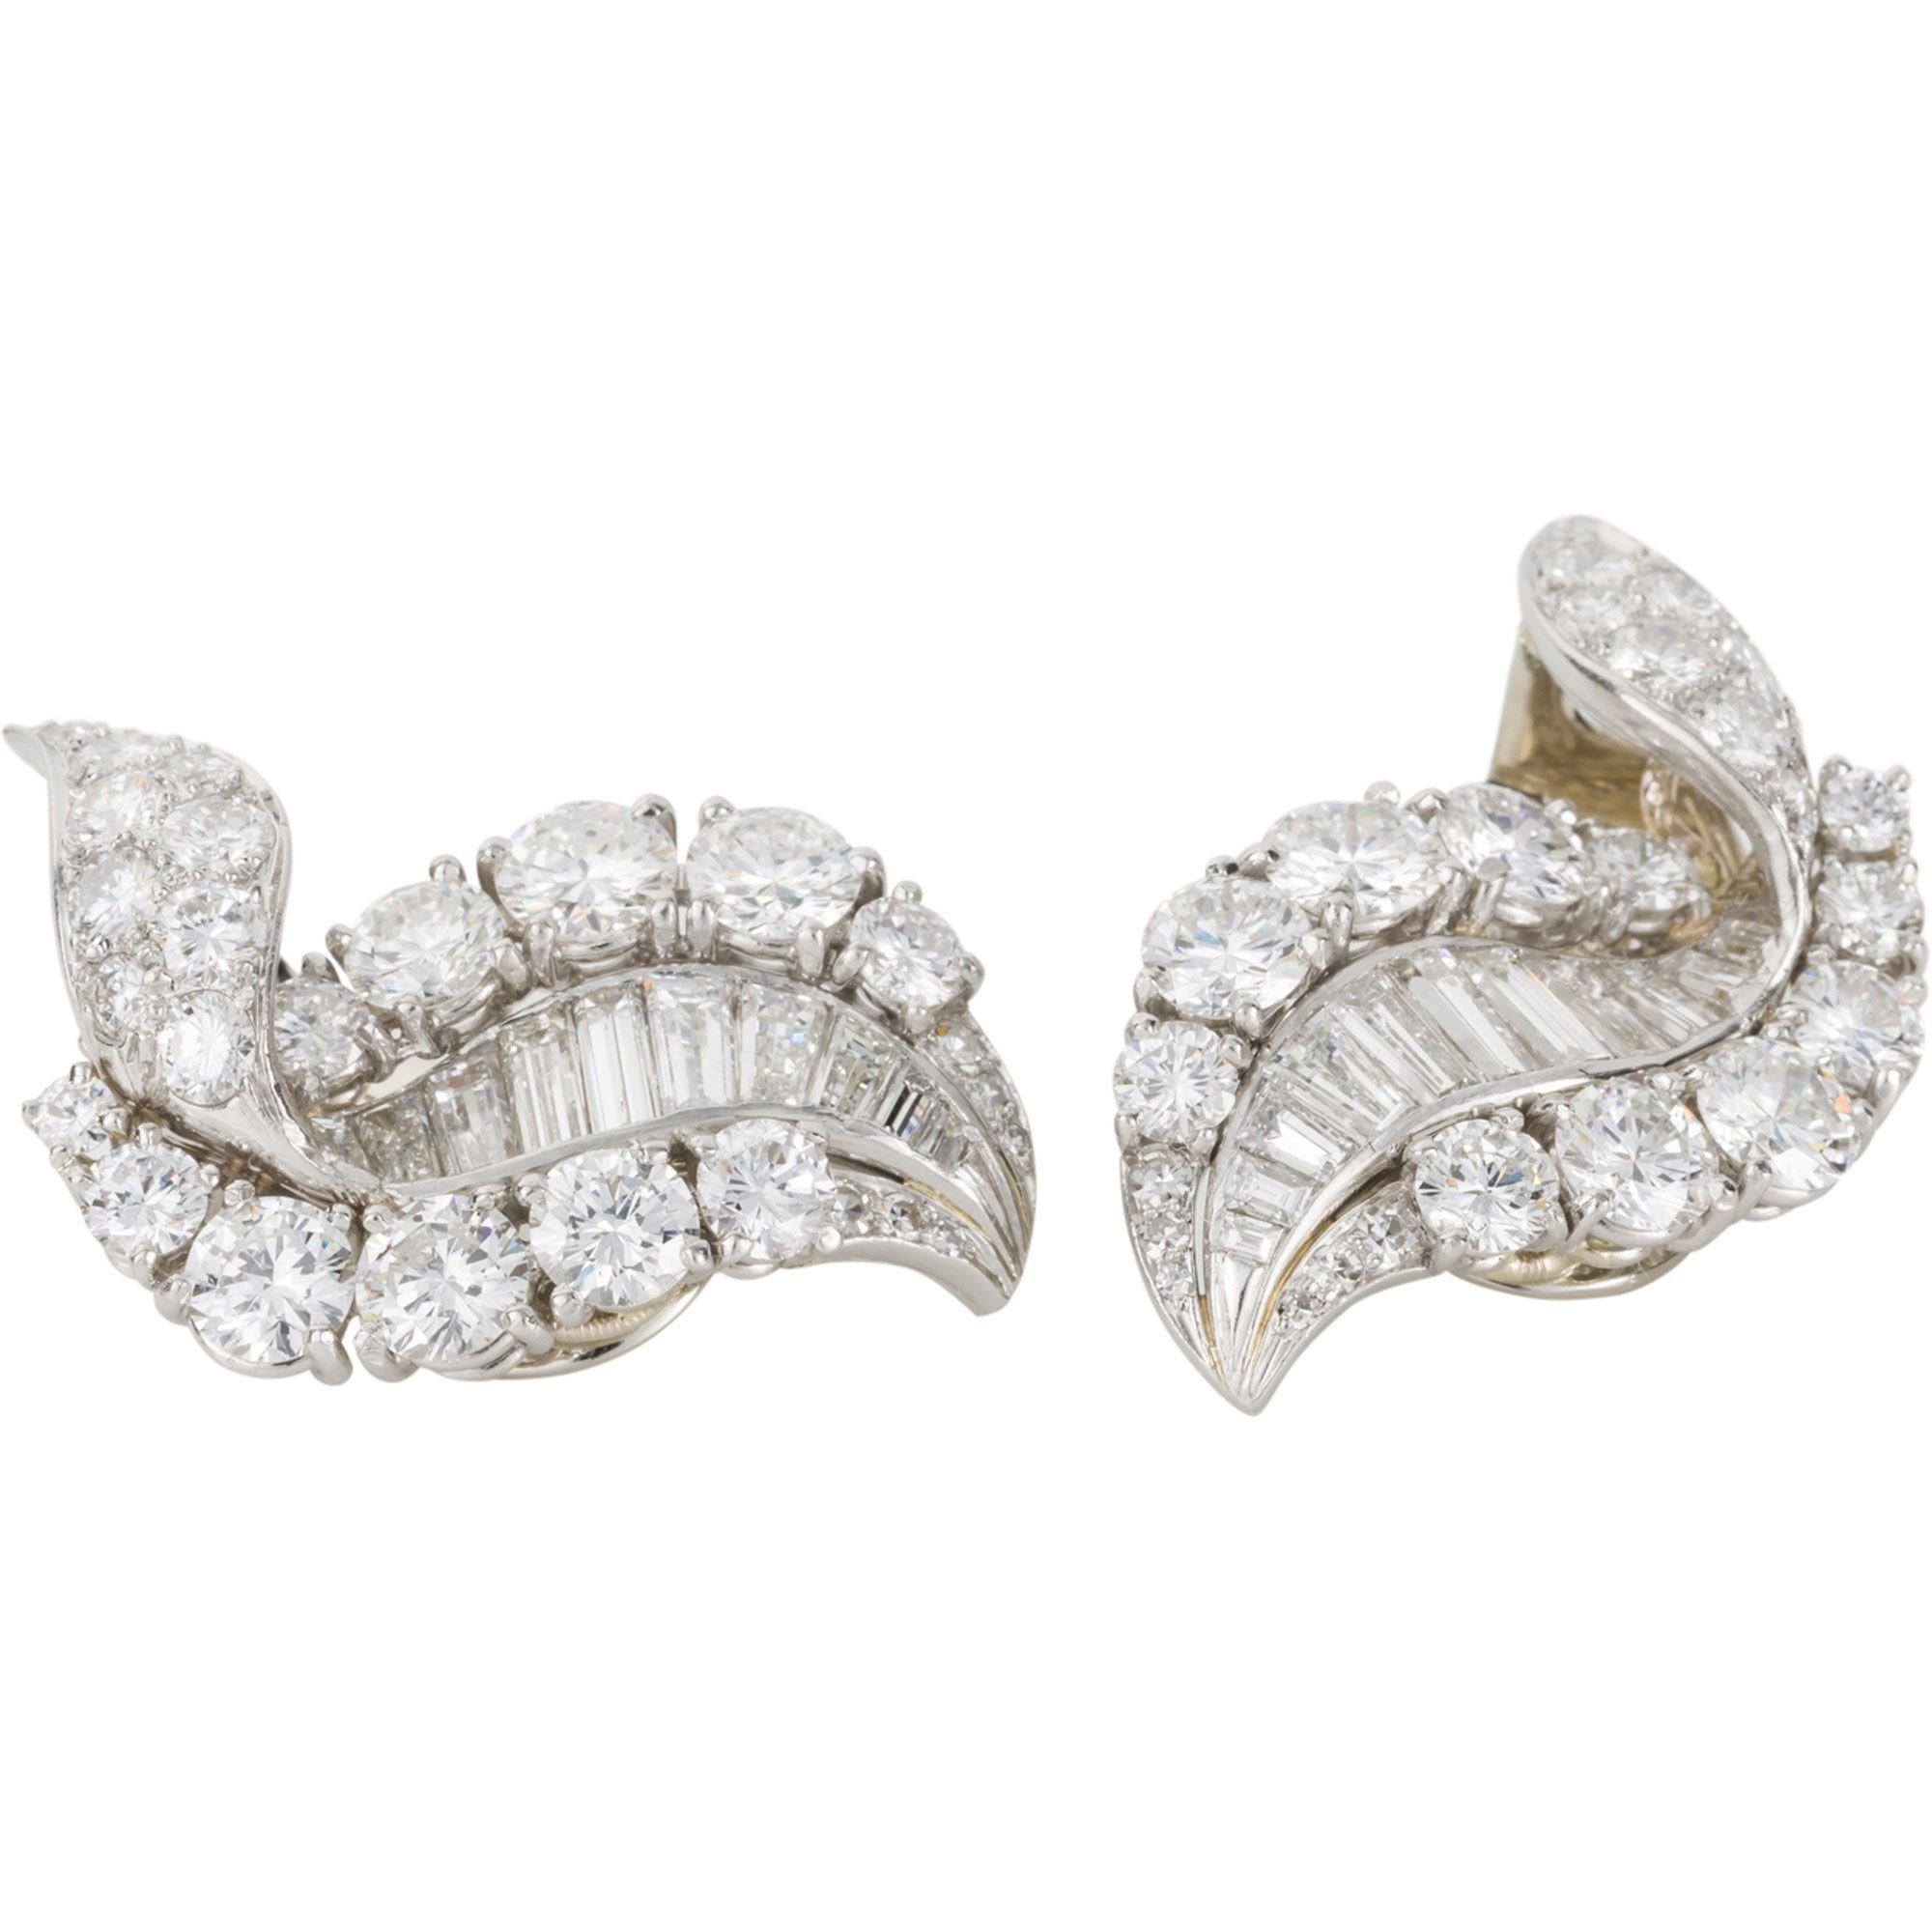 Magnificent is the only way to describe these earrings showcasing beautiful top quality diamonds. A mixture of round brilliant cuts and baguette cut diamonds - 11cts in total. Each set with 11 baguette cuts and 26 round brilliant cuts a total of 74